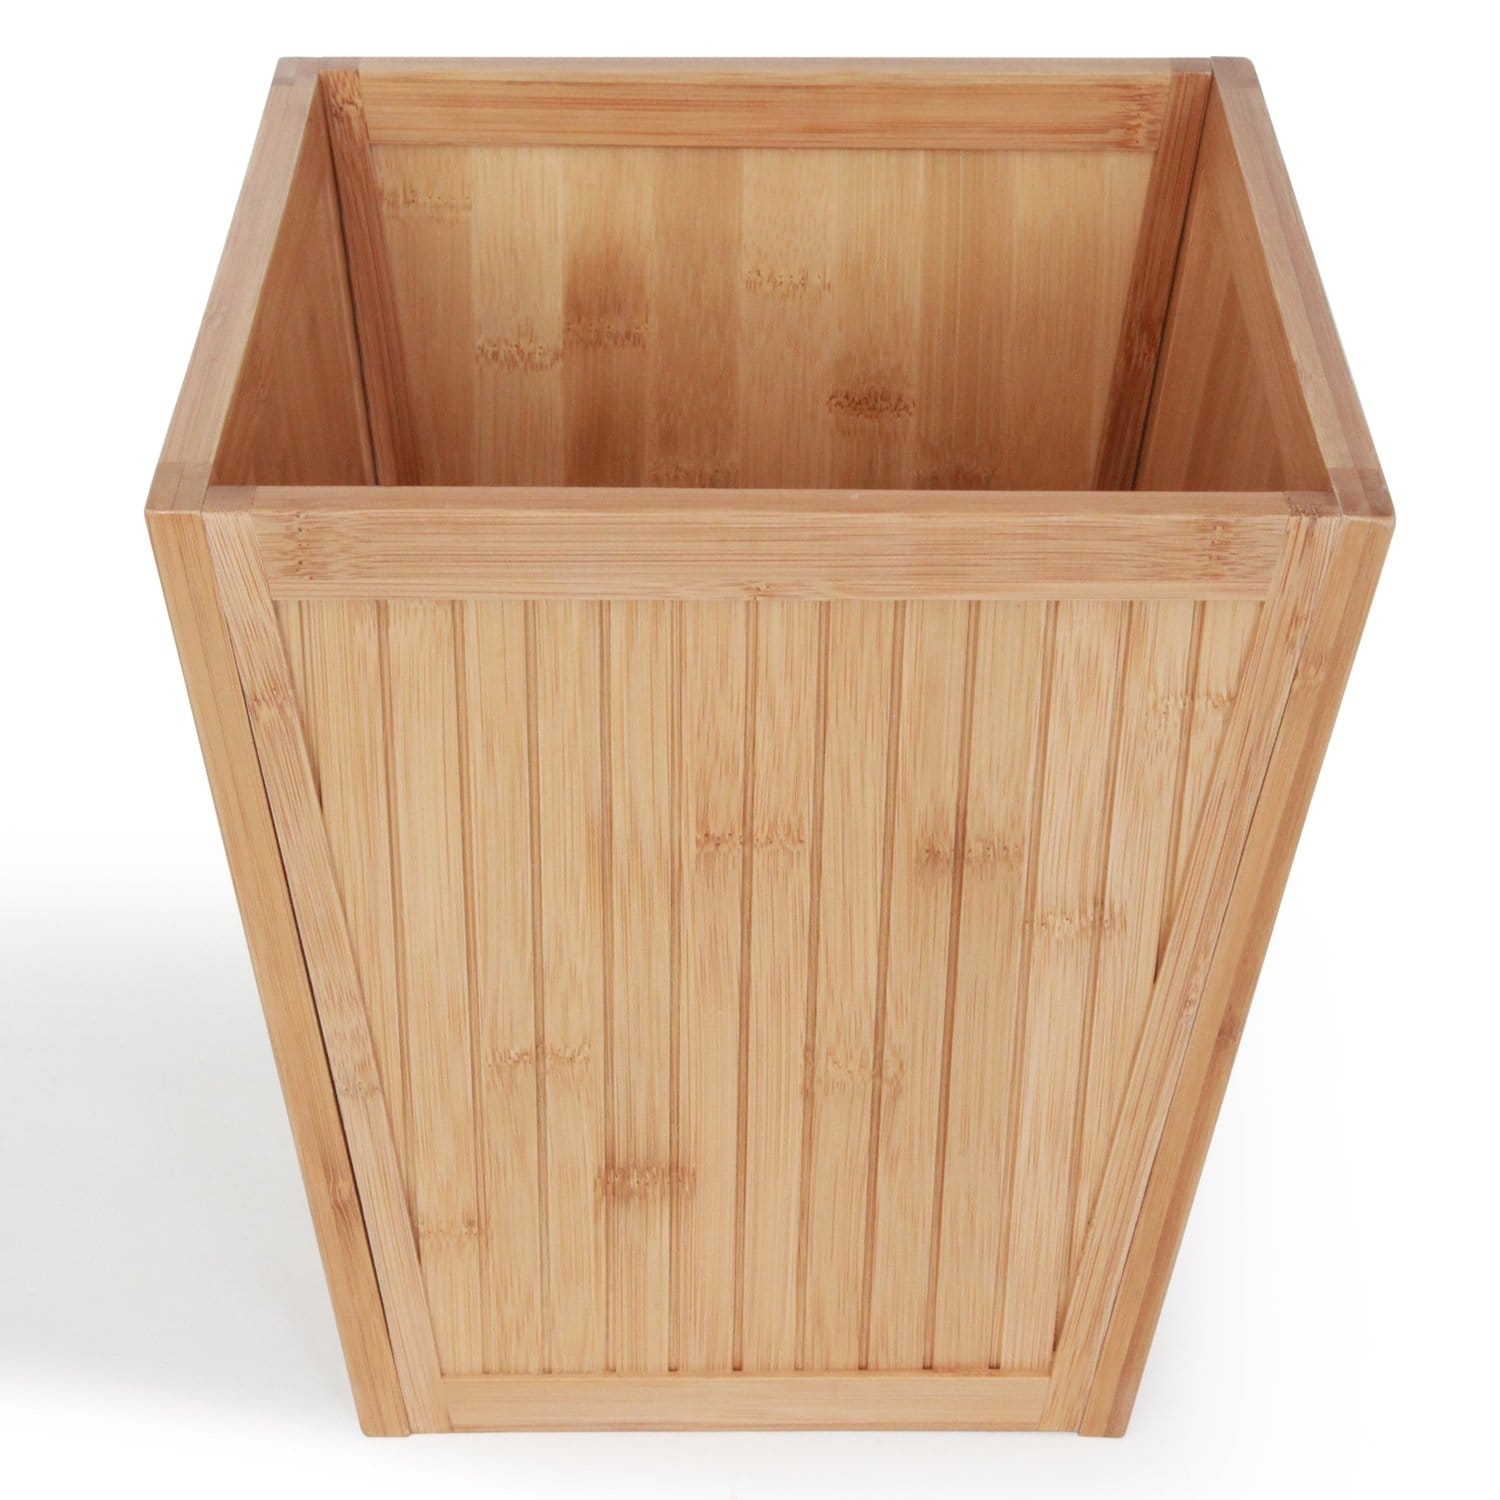 https://ak1.ostkcdn.com/images/products/is/images/direct/77258191470f103c78d3424df60270a0b7fdde7c/ToiletTree-Products-100%25-Bamboo-Wooden-Wastebasket-Trash-Can.jpg